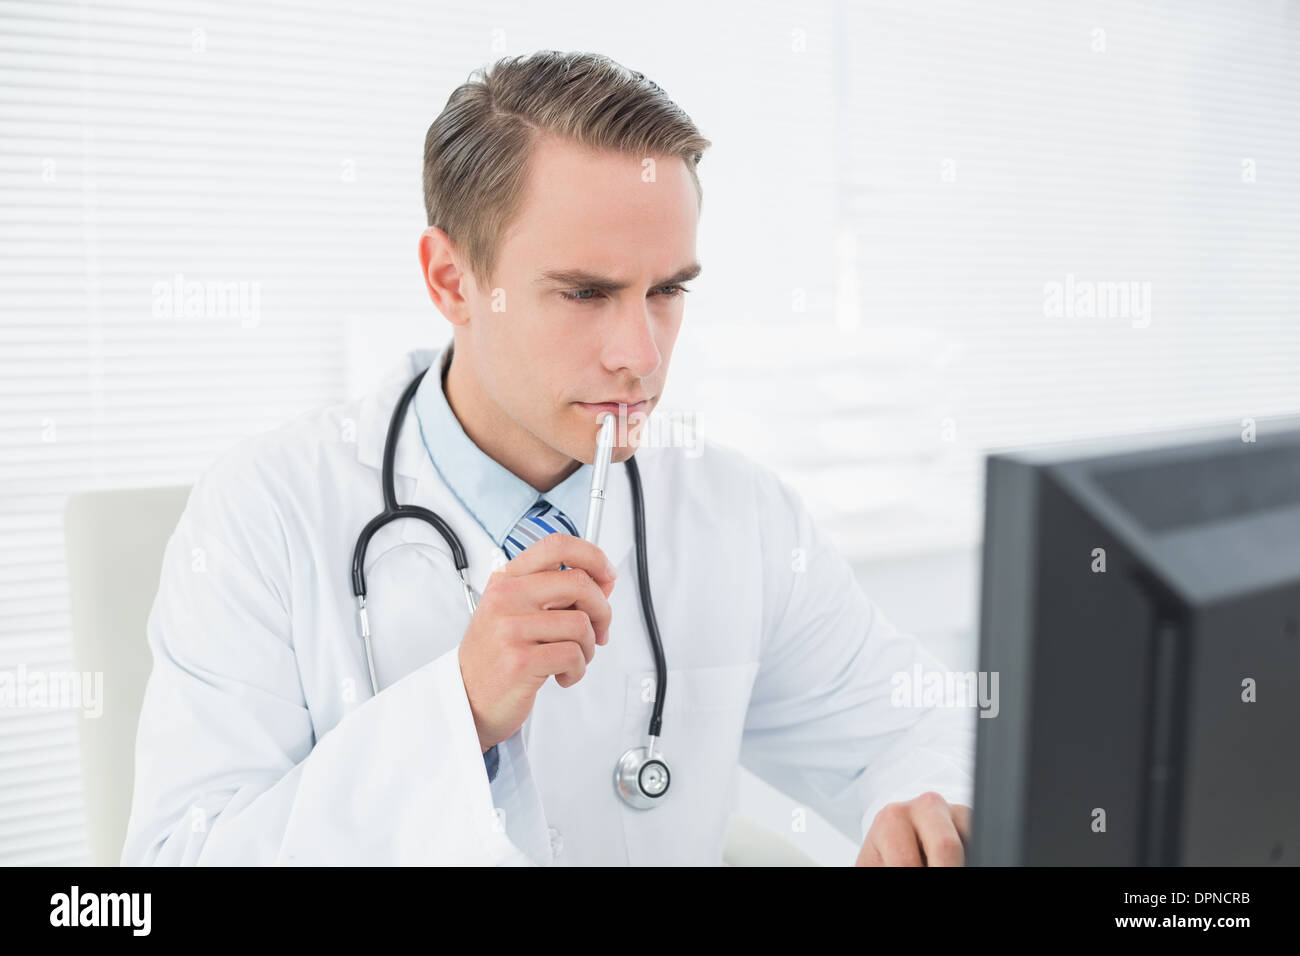 Doctor looking at computer at medical office Stock Photo